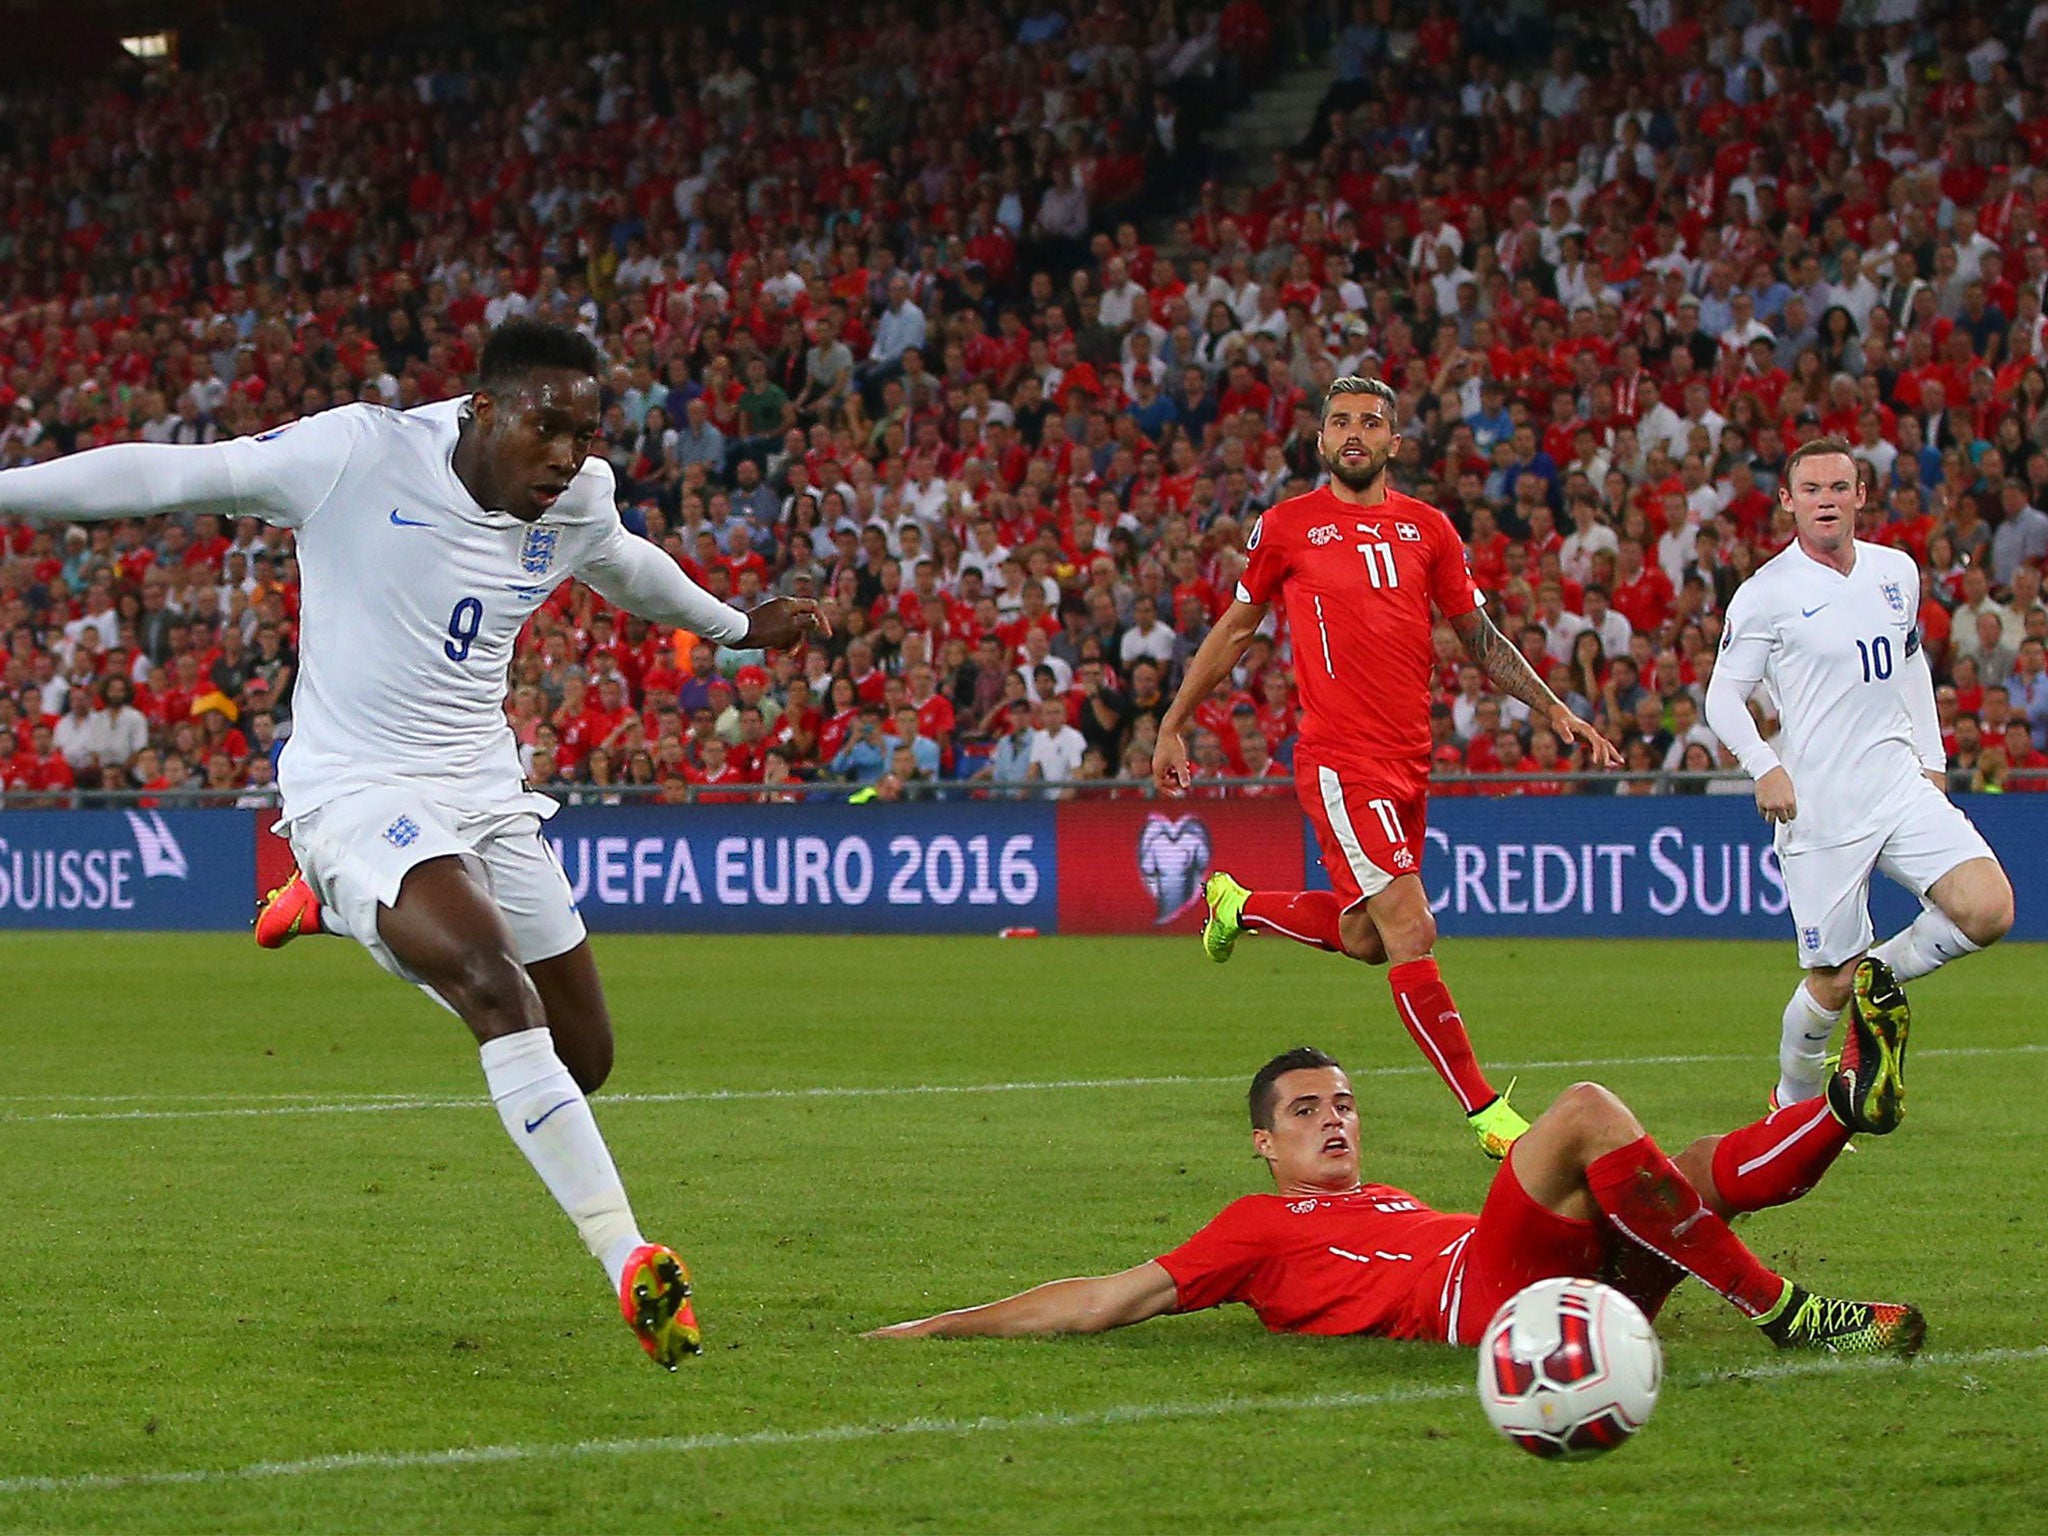 Danny Welbeck puts England one up against Switzerland